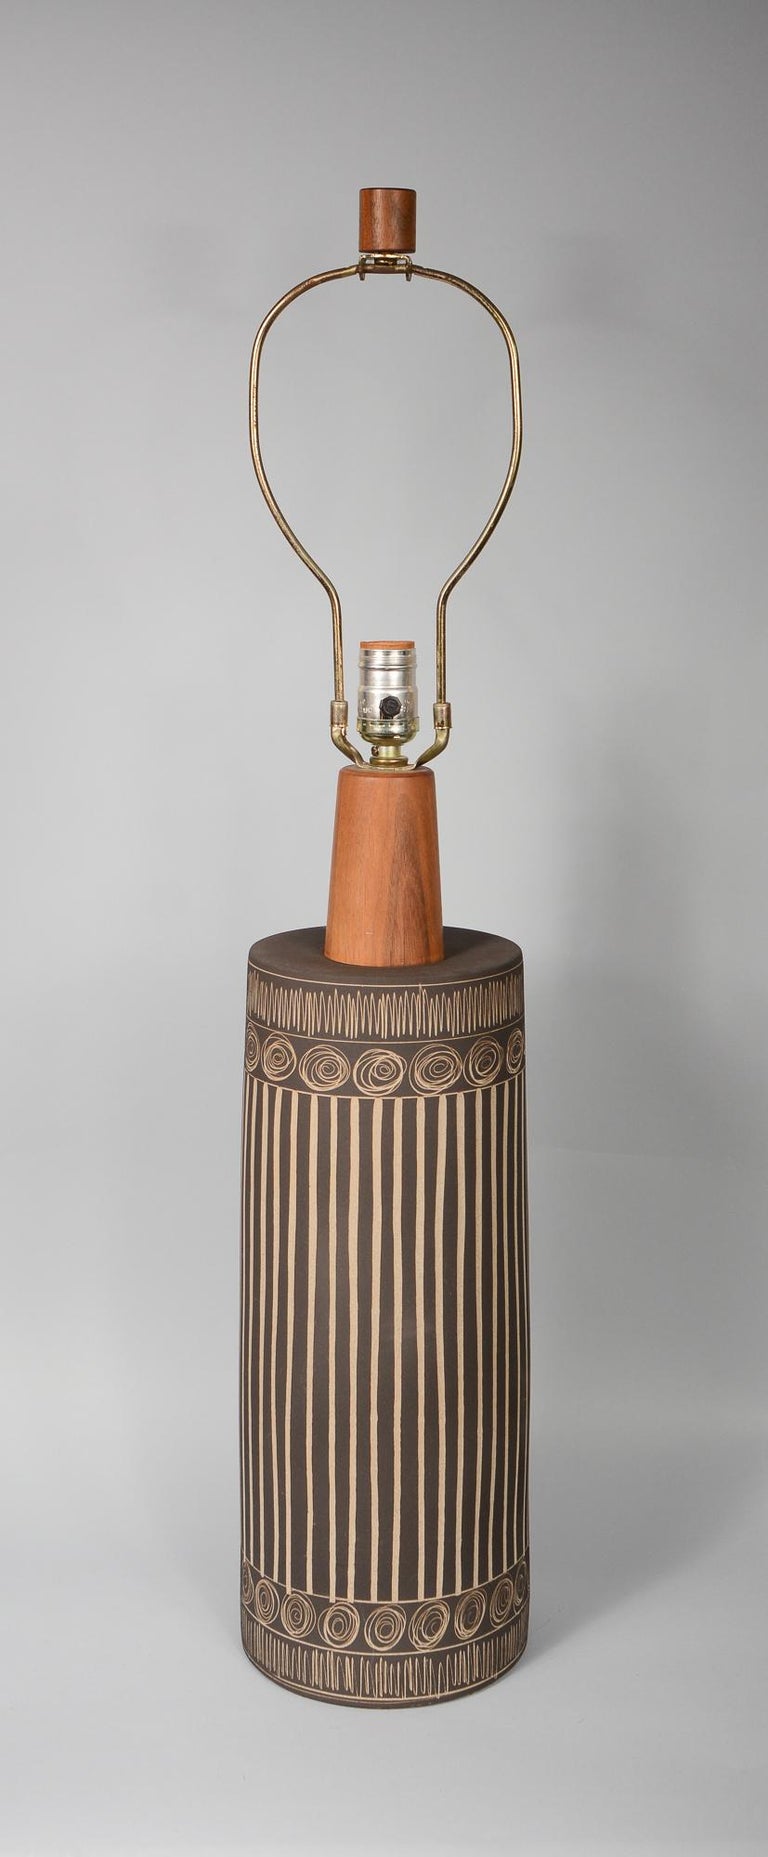 Ceramic table lamp by Gordon & Jane Martz for Marshall Studios. This lamp has a flat brown glaze with incised designs. The glaze has a texture of very fine sand. This has the original walnut finial and wiring. We can rewire this at no charge if you